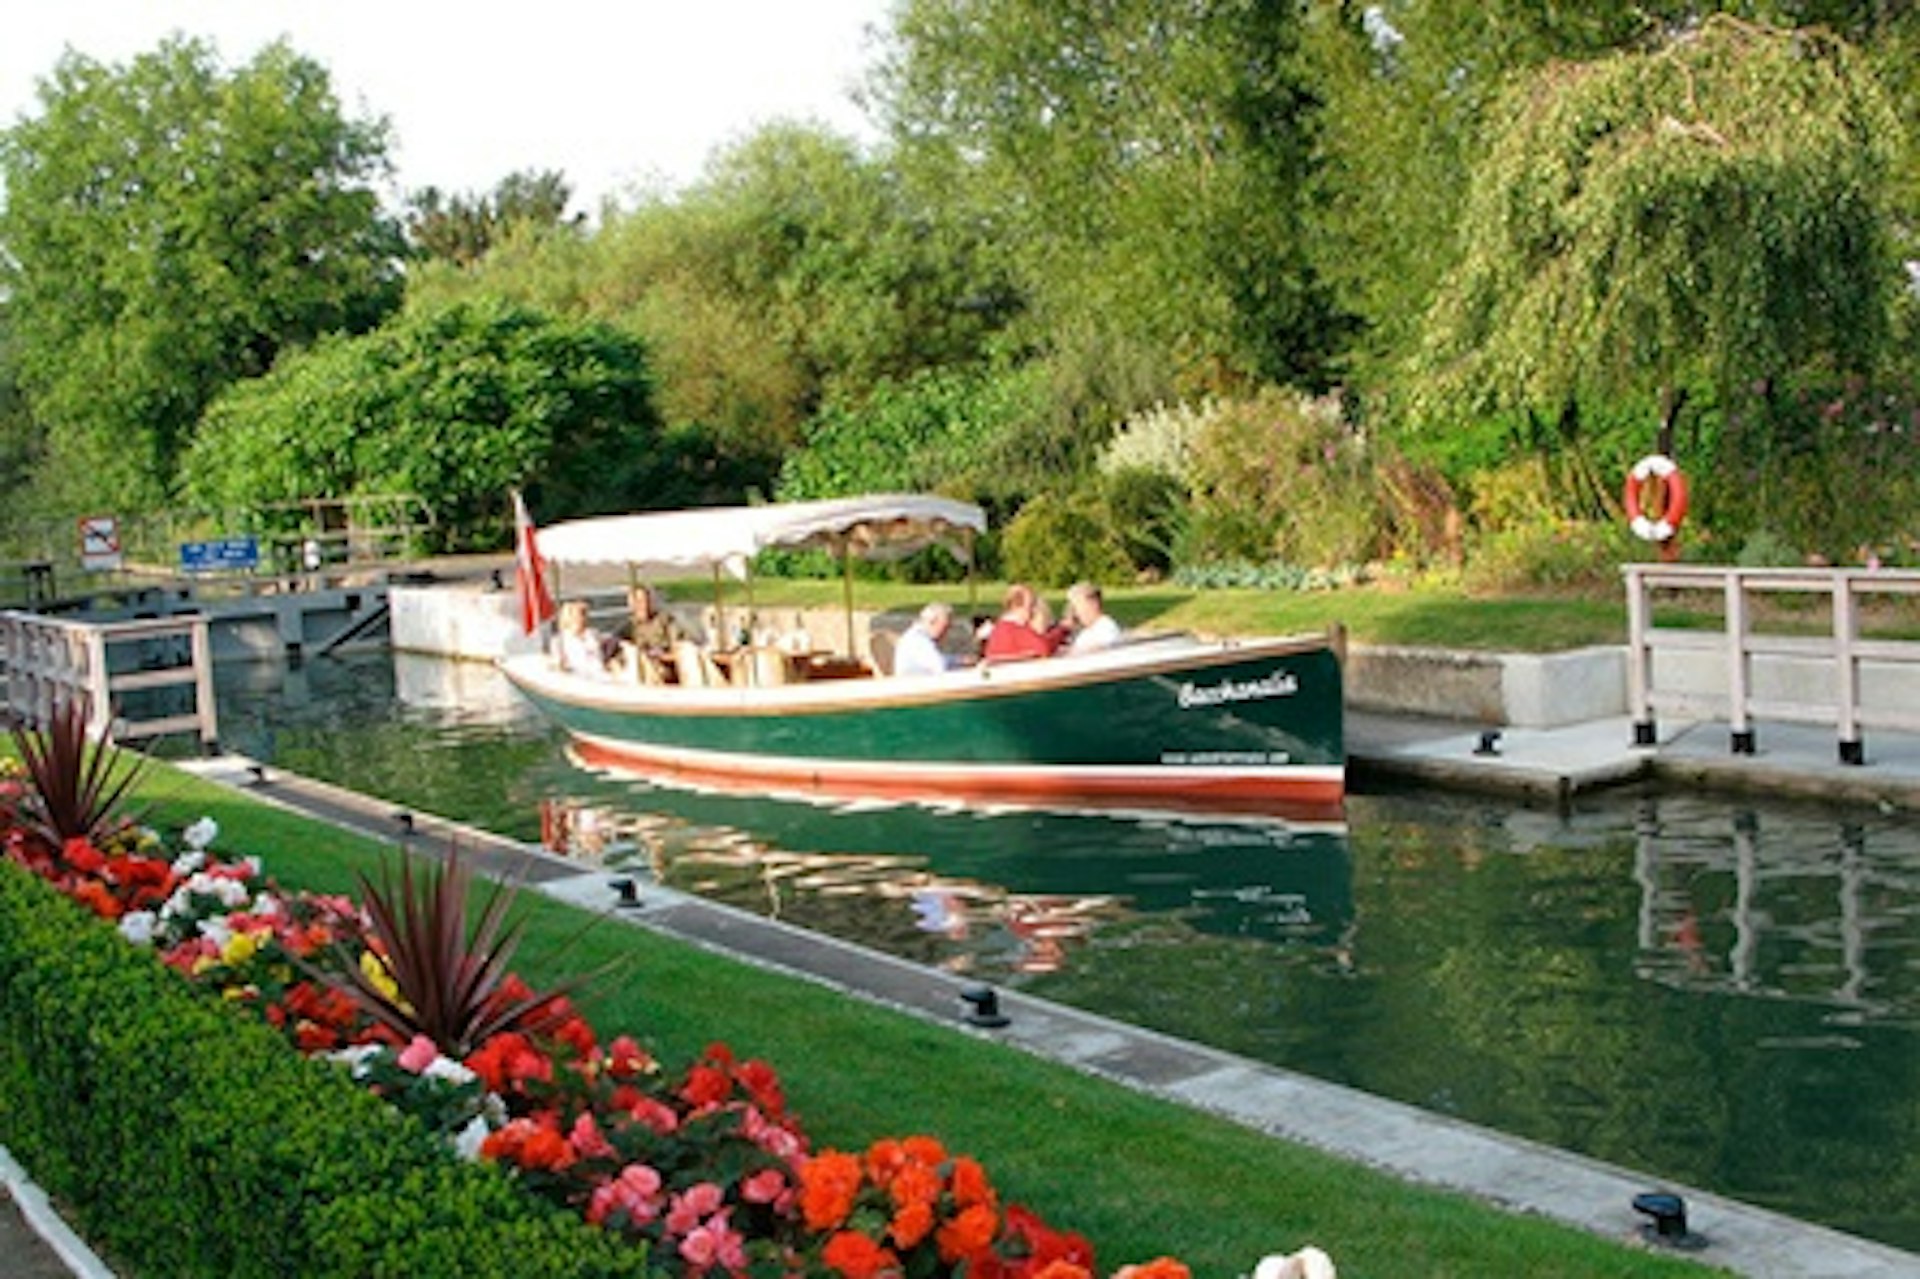 Oxford Picnic River Boat Cruise for Two 4